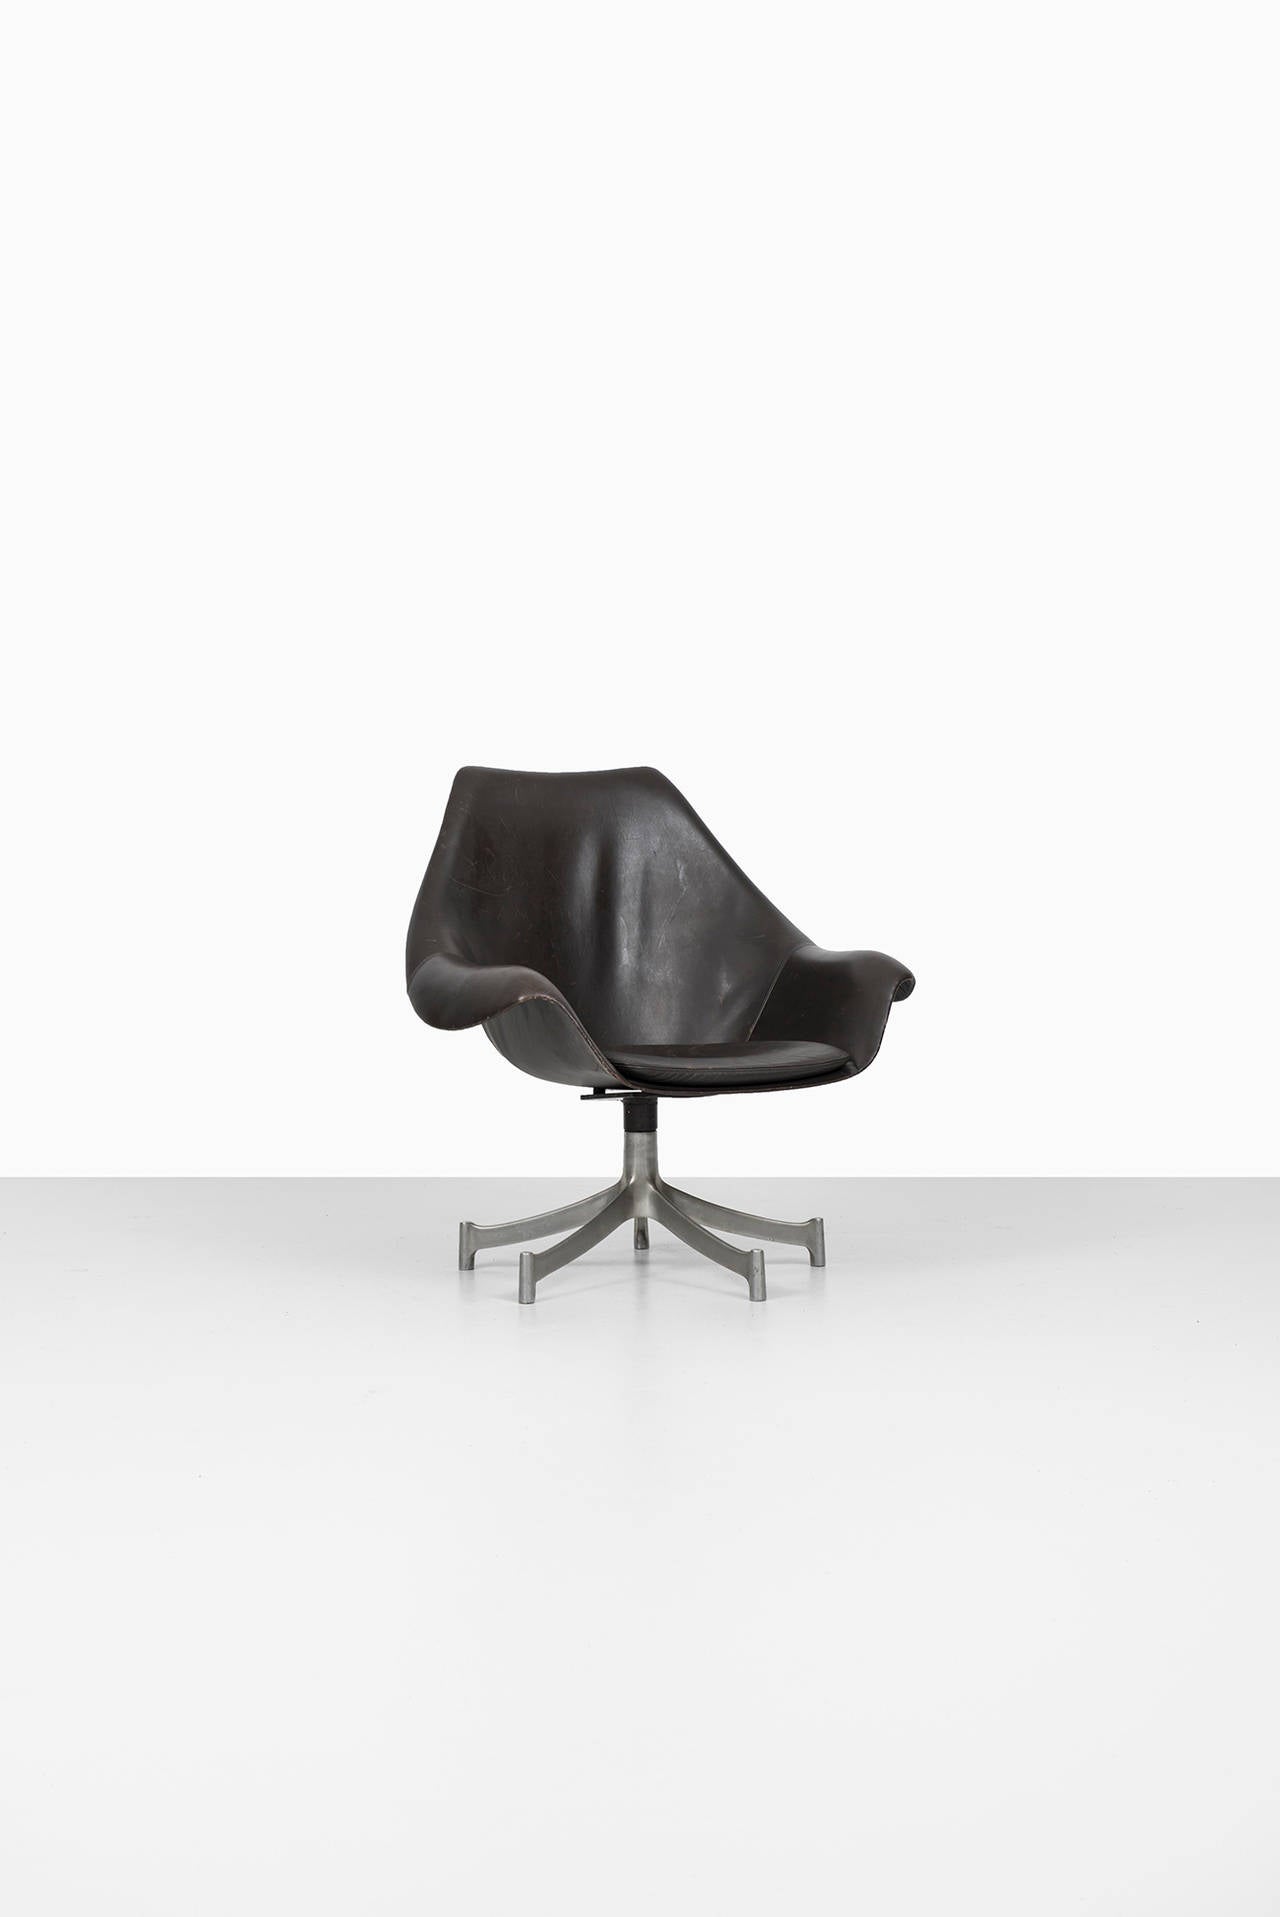 Very rare office chair designed by Jørgen Lund & Ole Larsen. Produced by Bo-Ex in Denmark.